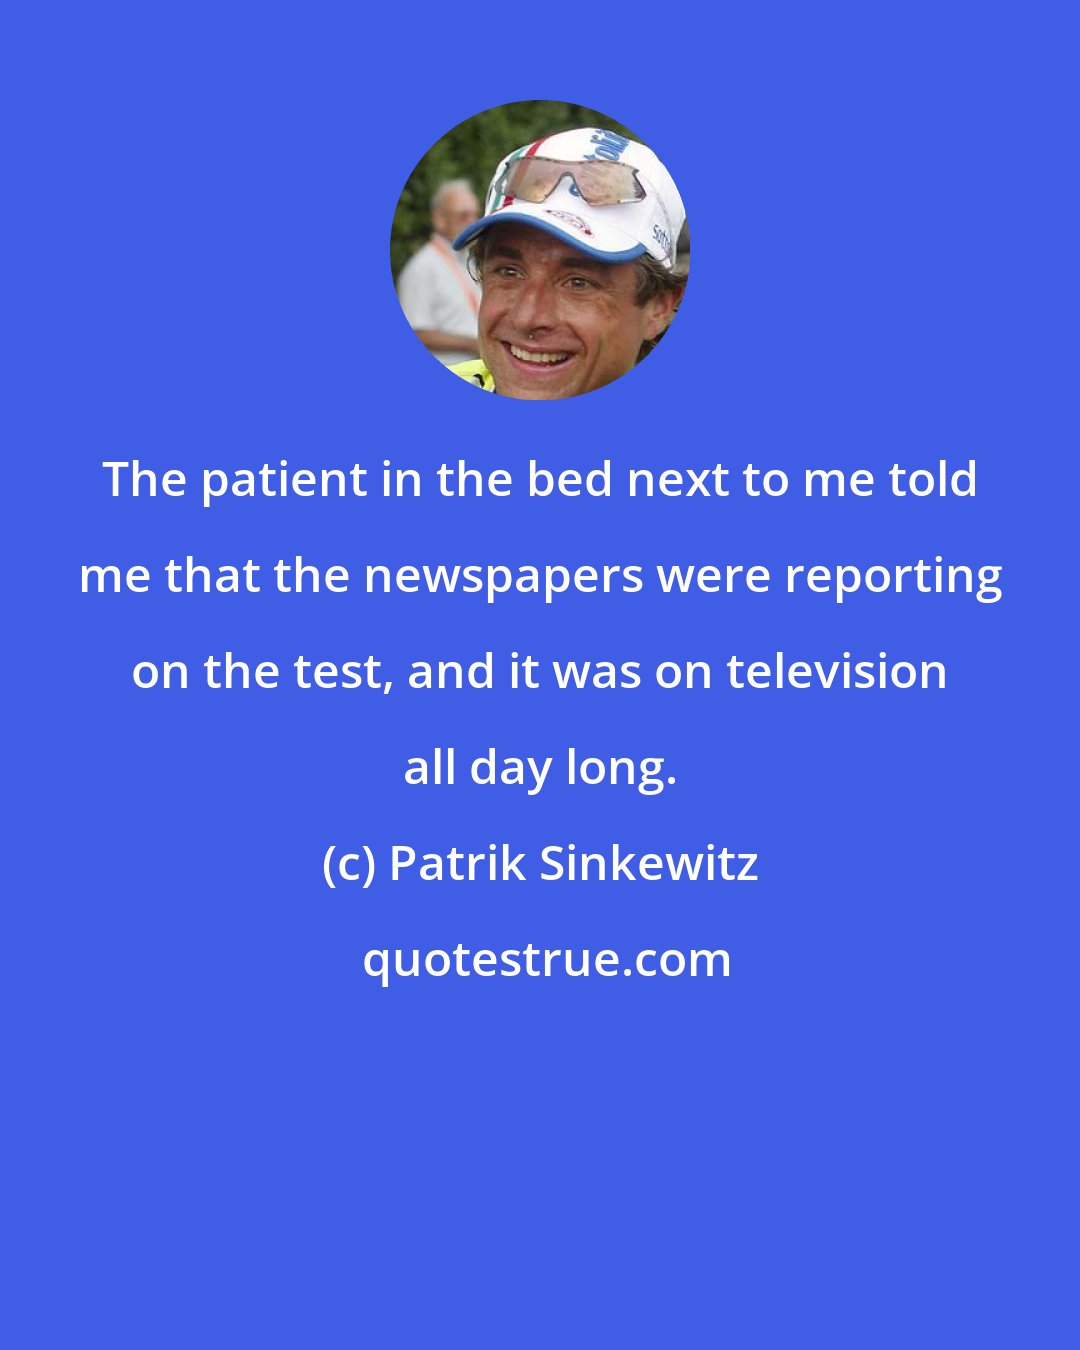 Patrik Sinkewitz: The patient in the bed next to me told me that the newspapers were reporting on the test, and it was on television all day long.